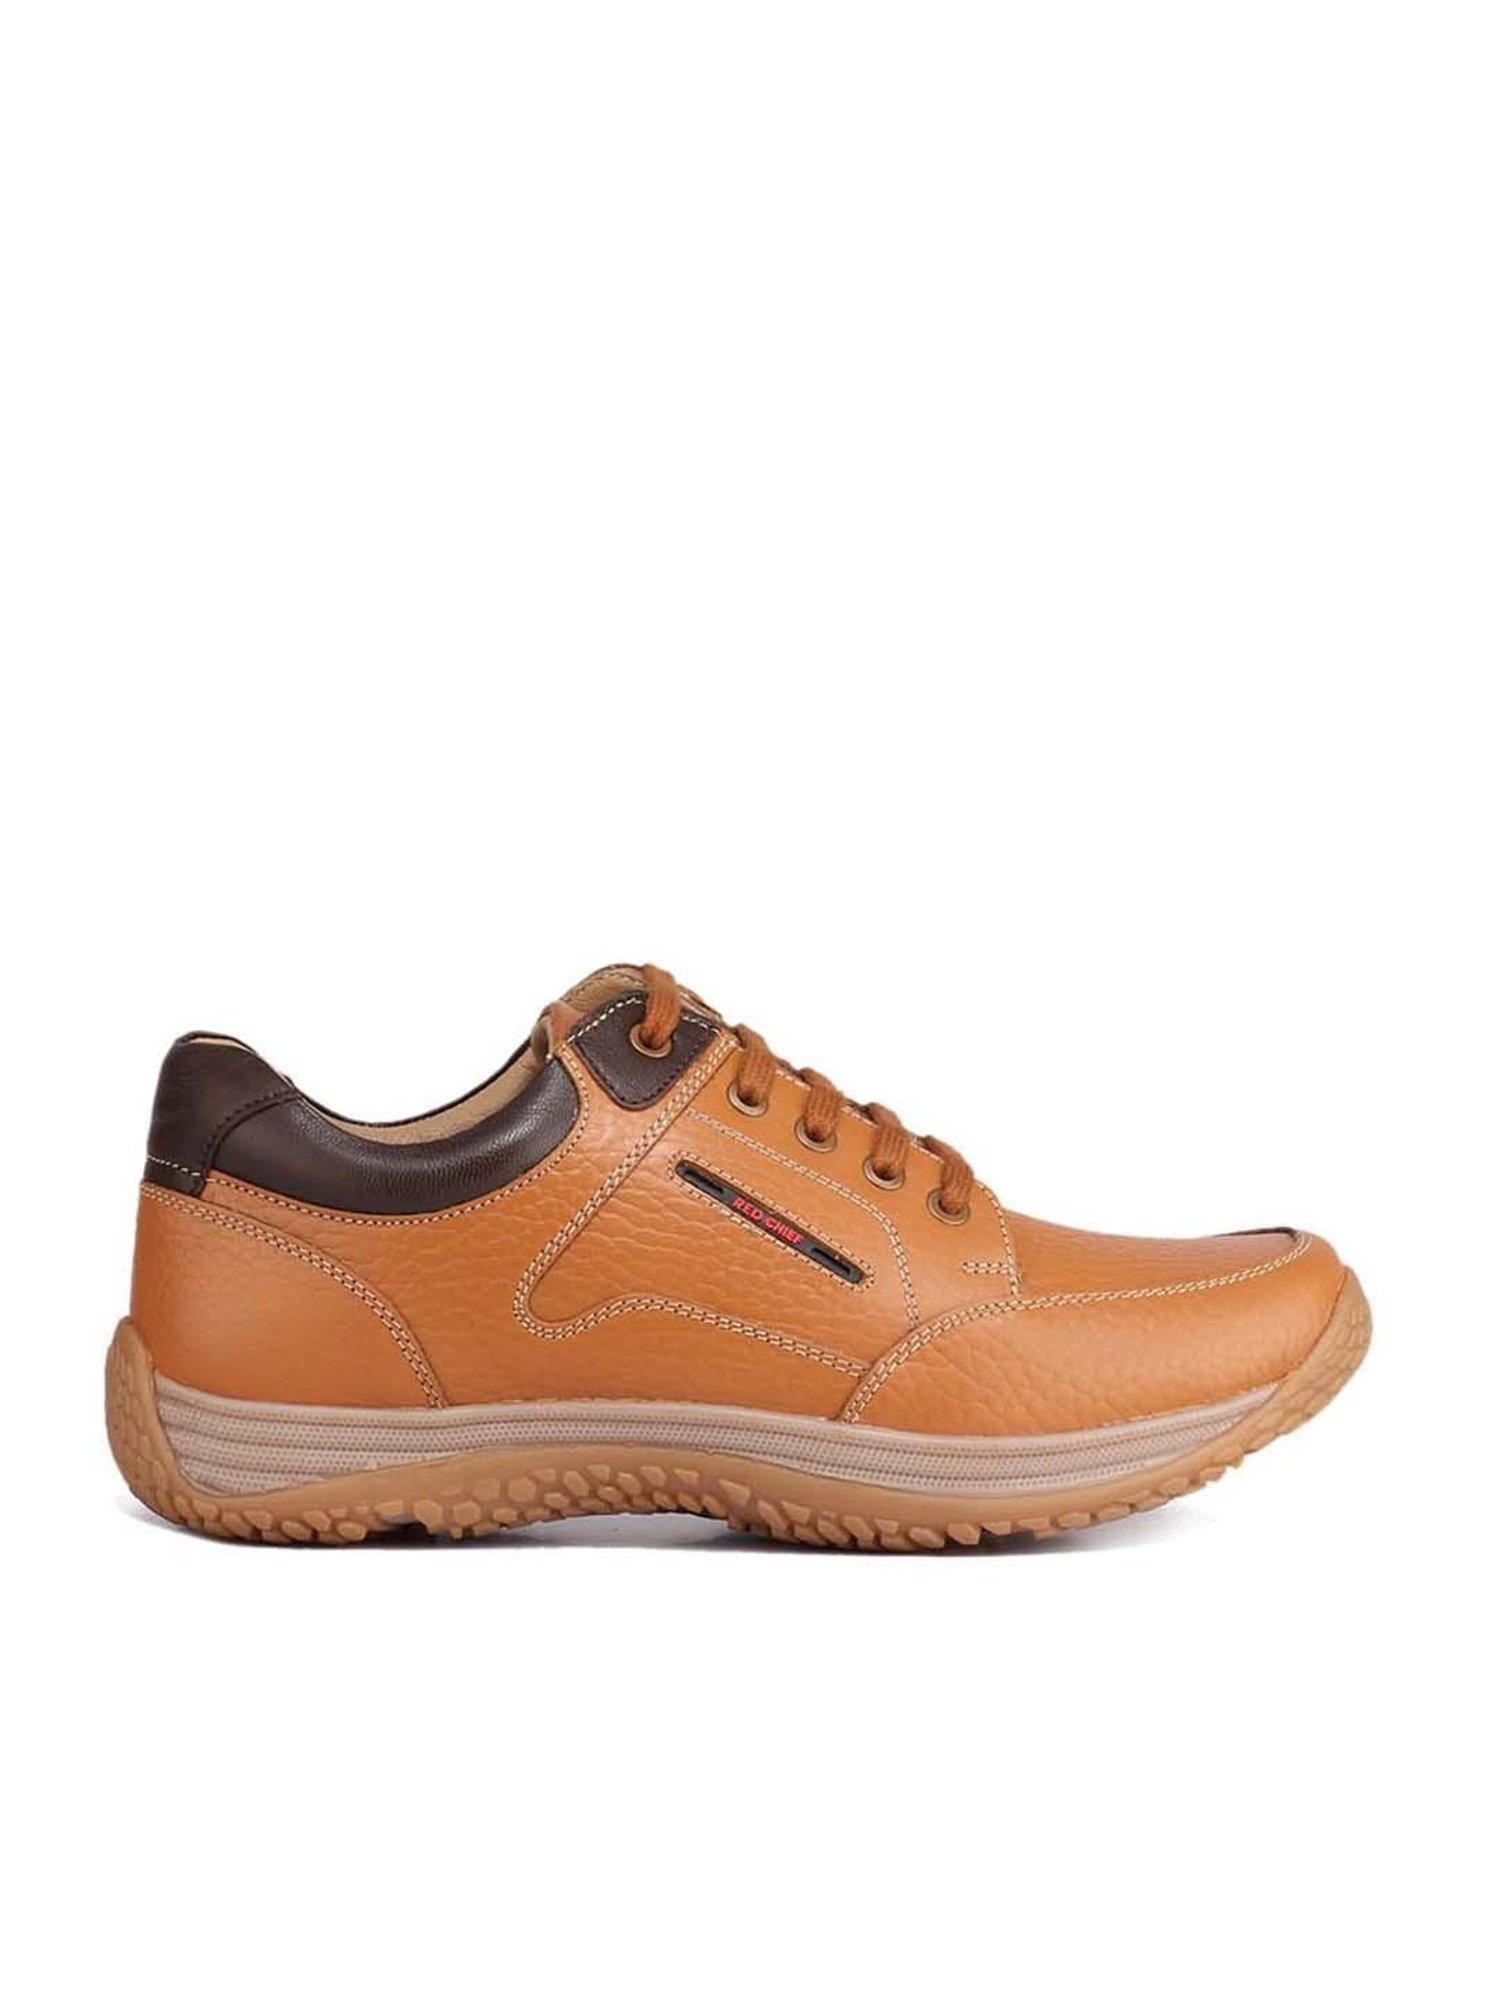 Red Chief Beige Outdoor Shoes for Men online in India at Best